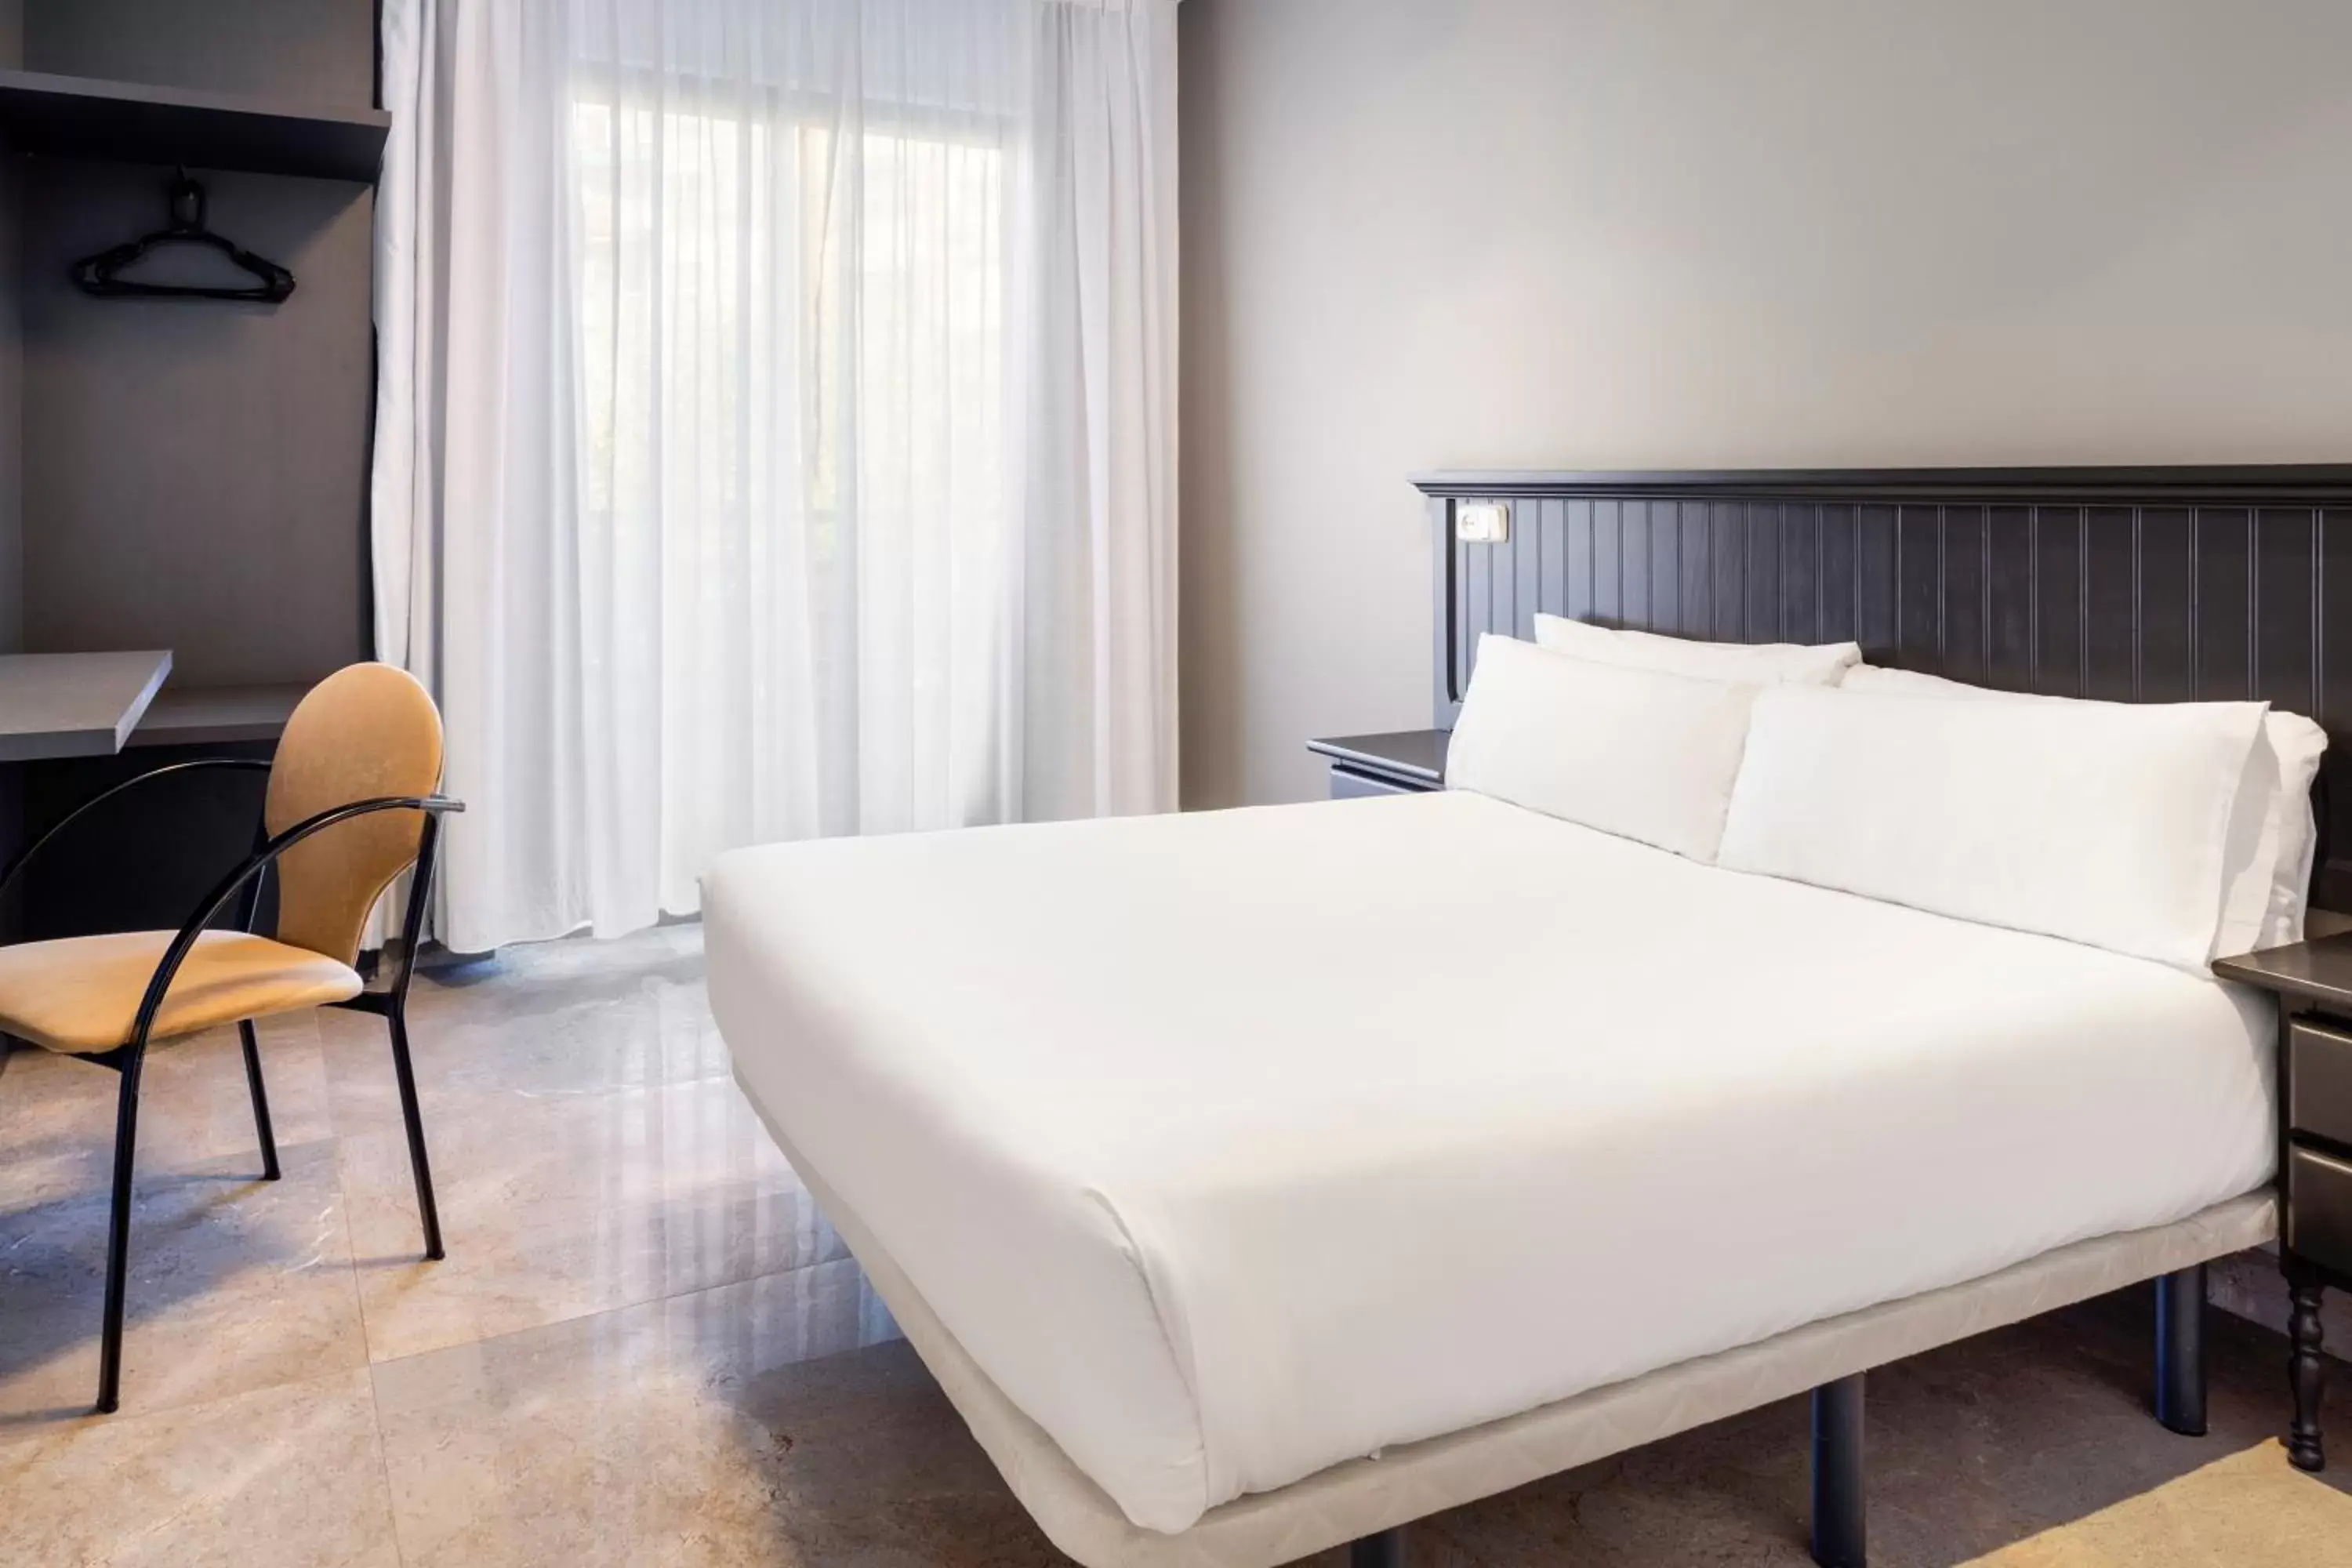 Bed in Hotel Victoria Valdemoro Inspired by B&B HOTELS